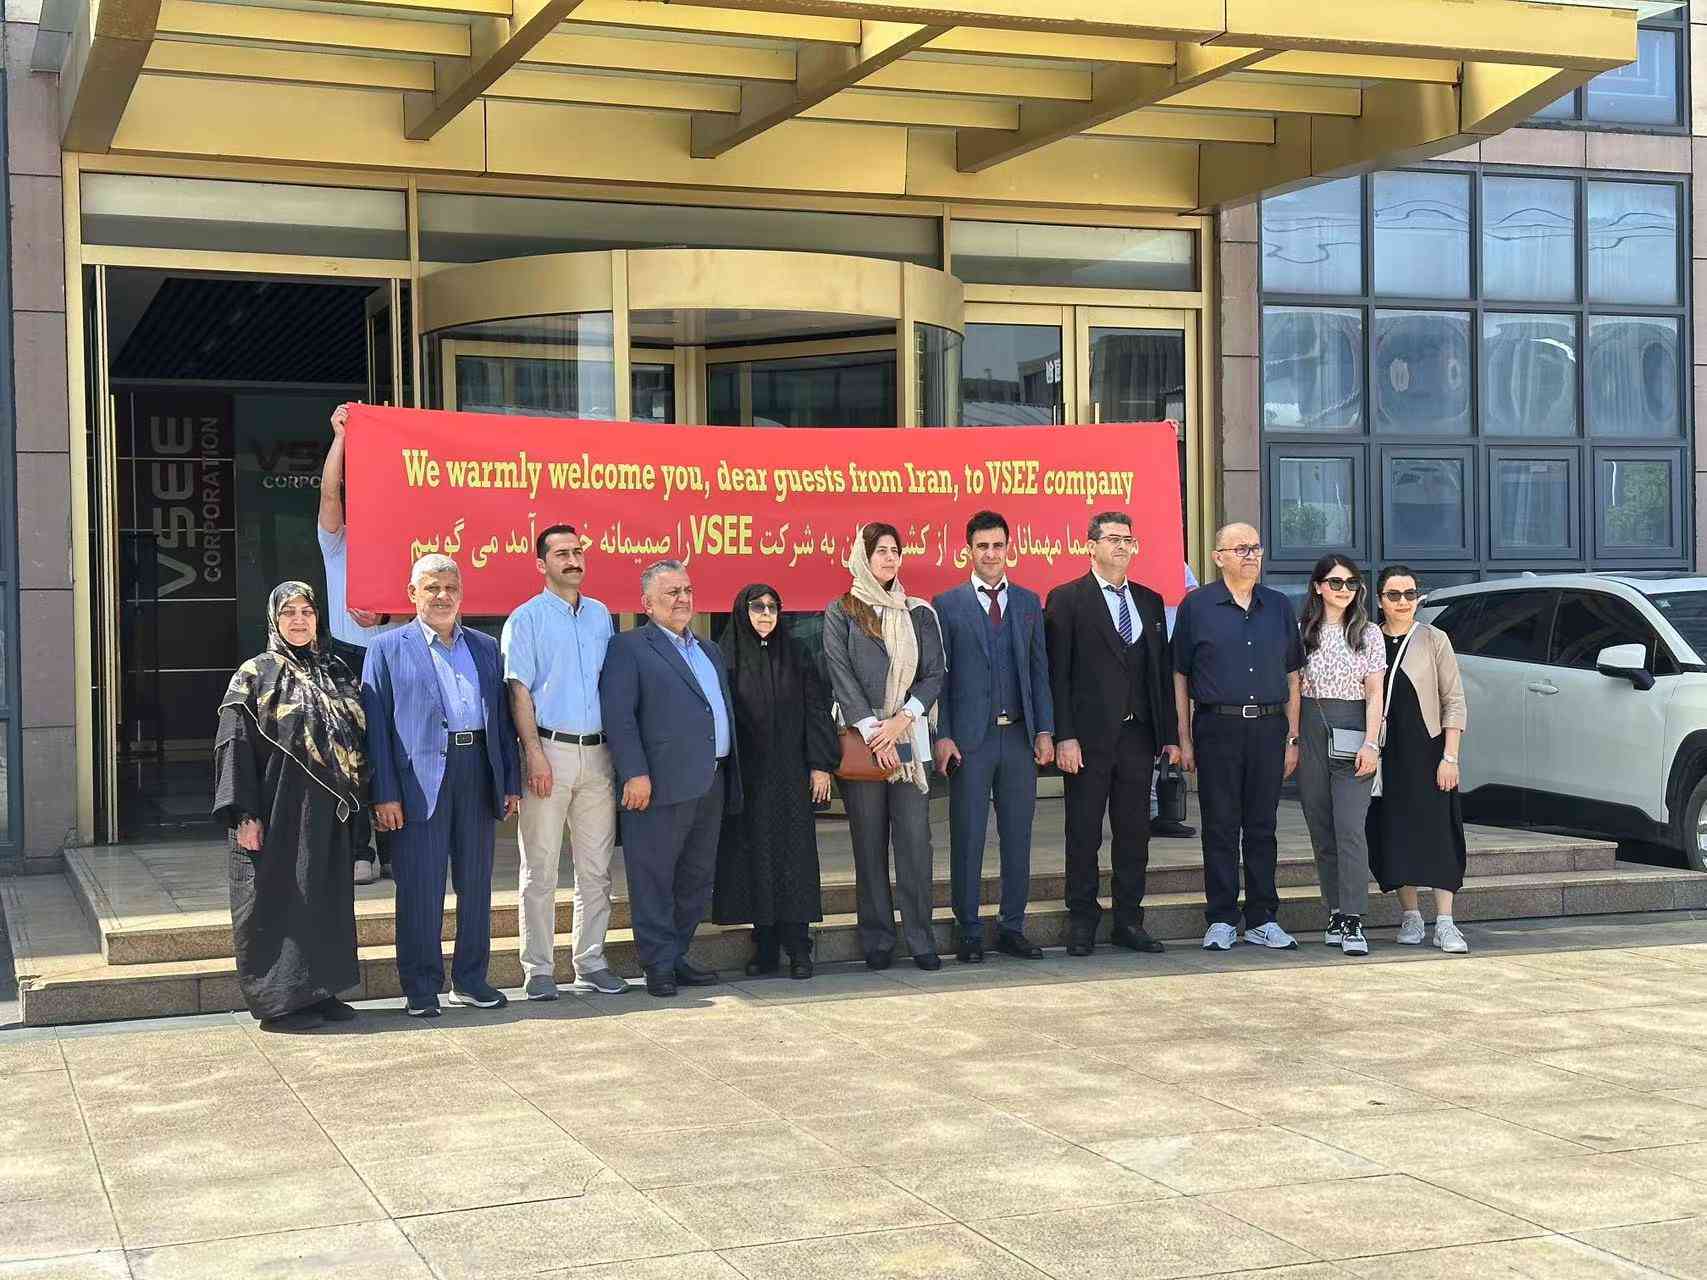 11 customers from Iran come to visit VSEE and establish cooperation